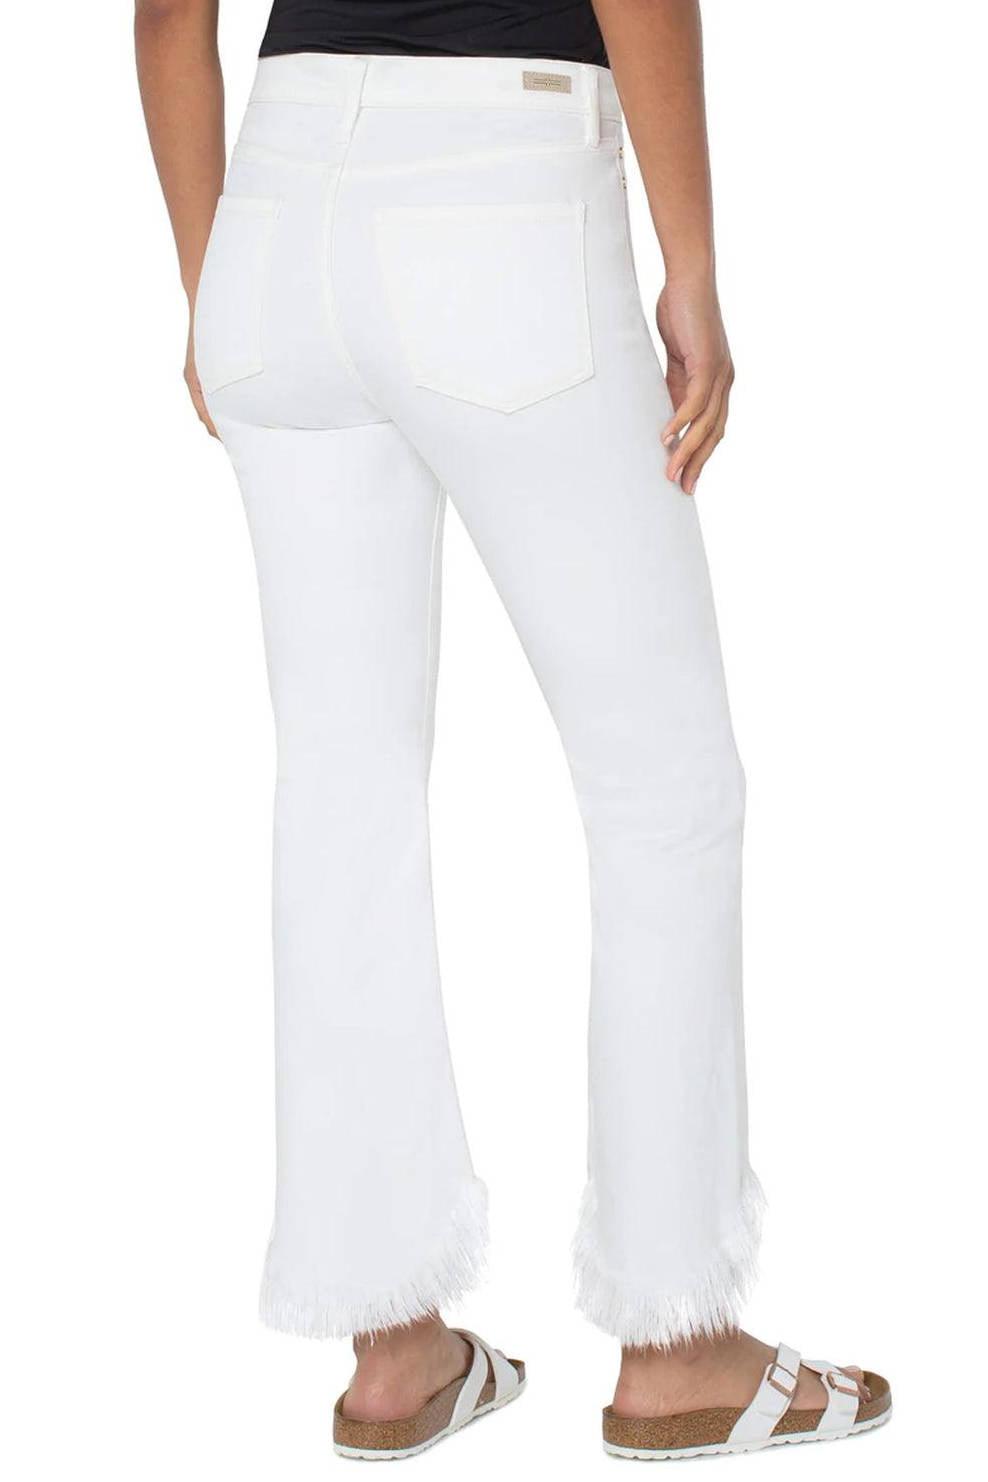 Liverpool White Crop Flare Hem Jeans - Strawberry Moon Boutique